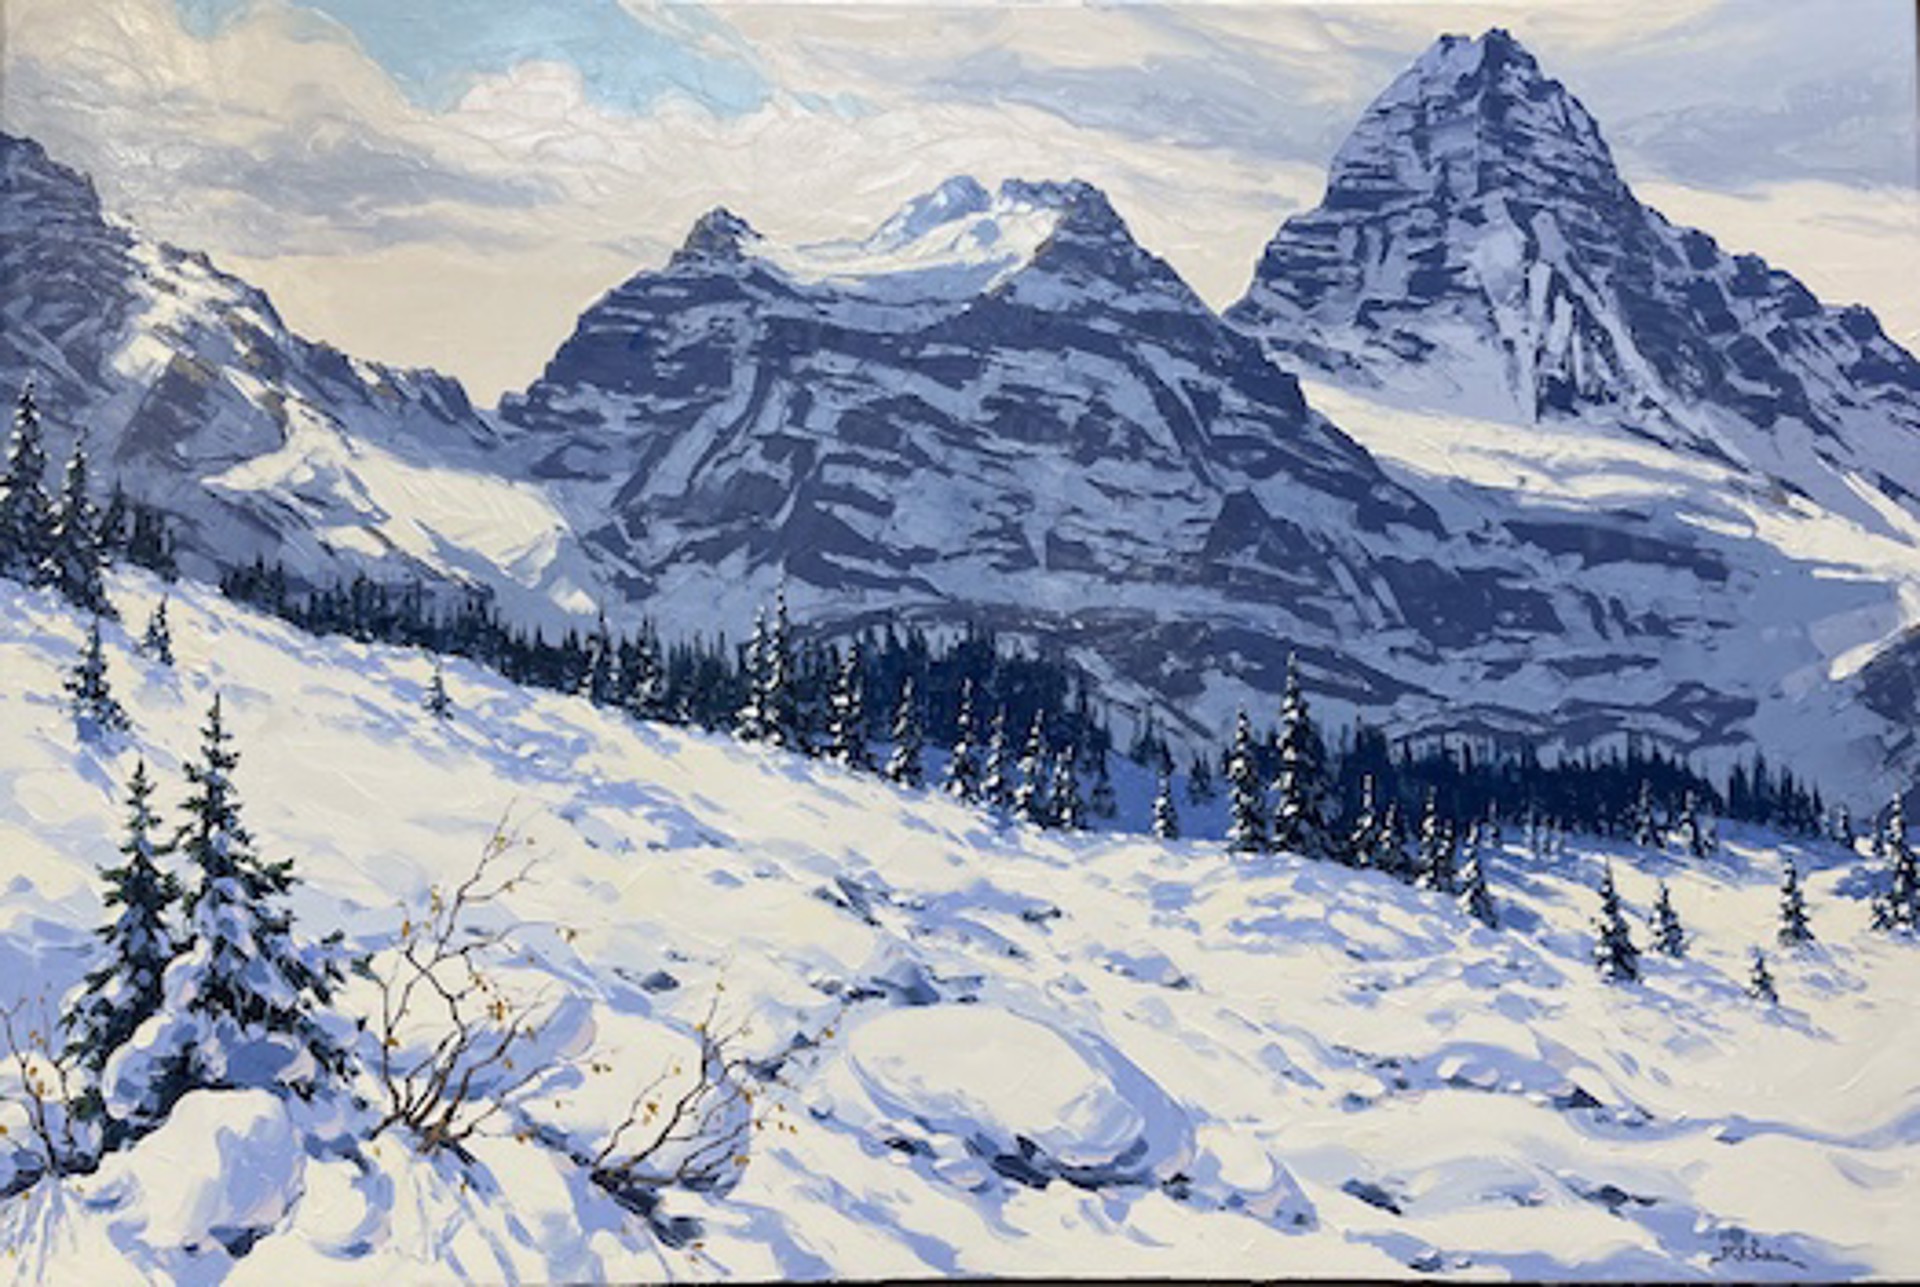 Winter Paradise - Mount Assinibione by Robert E Wood